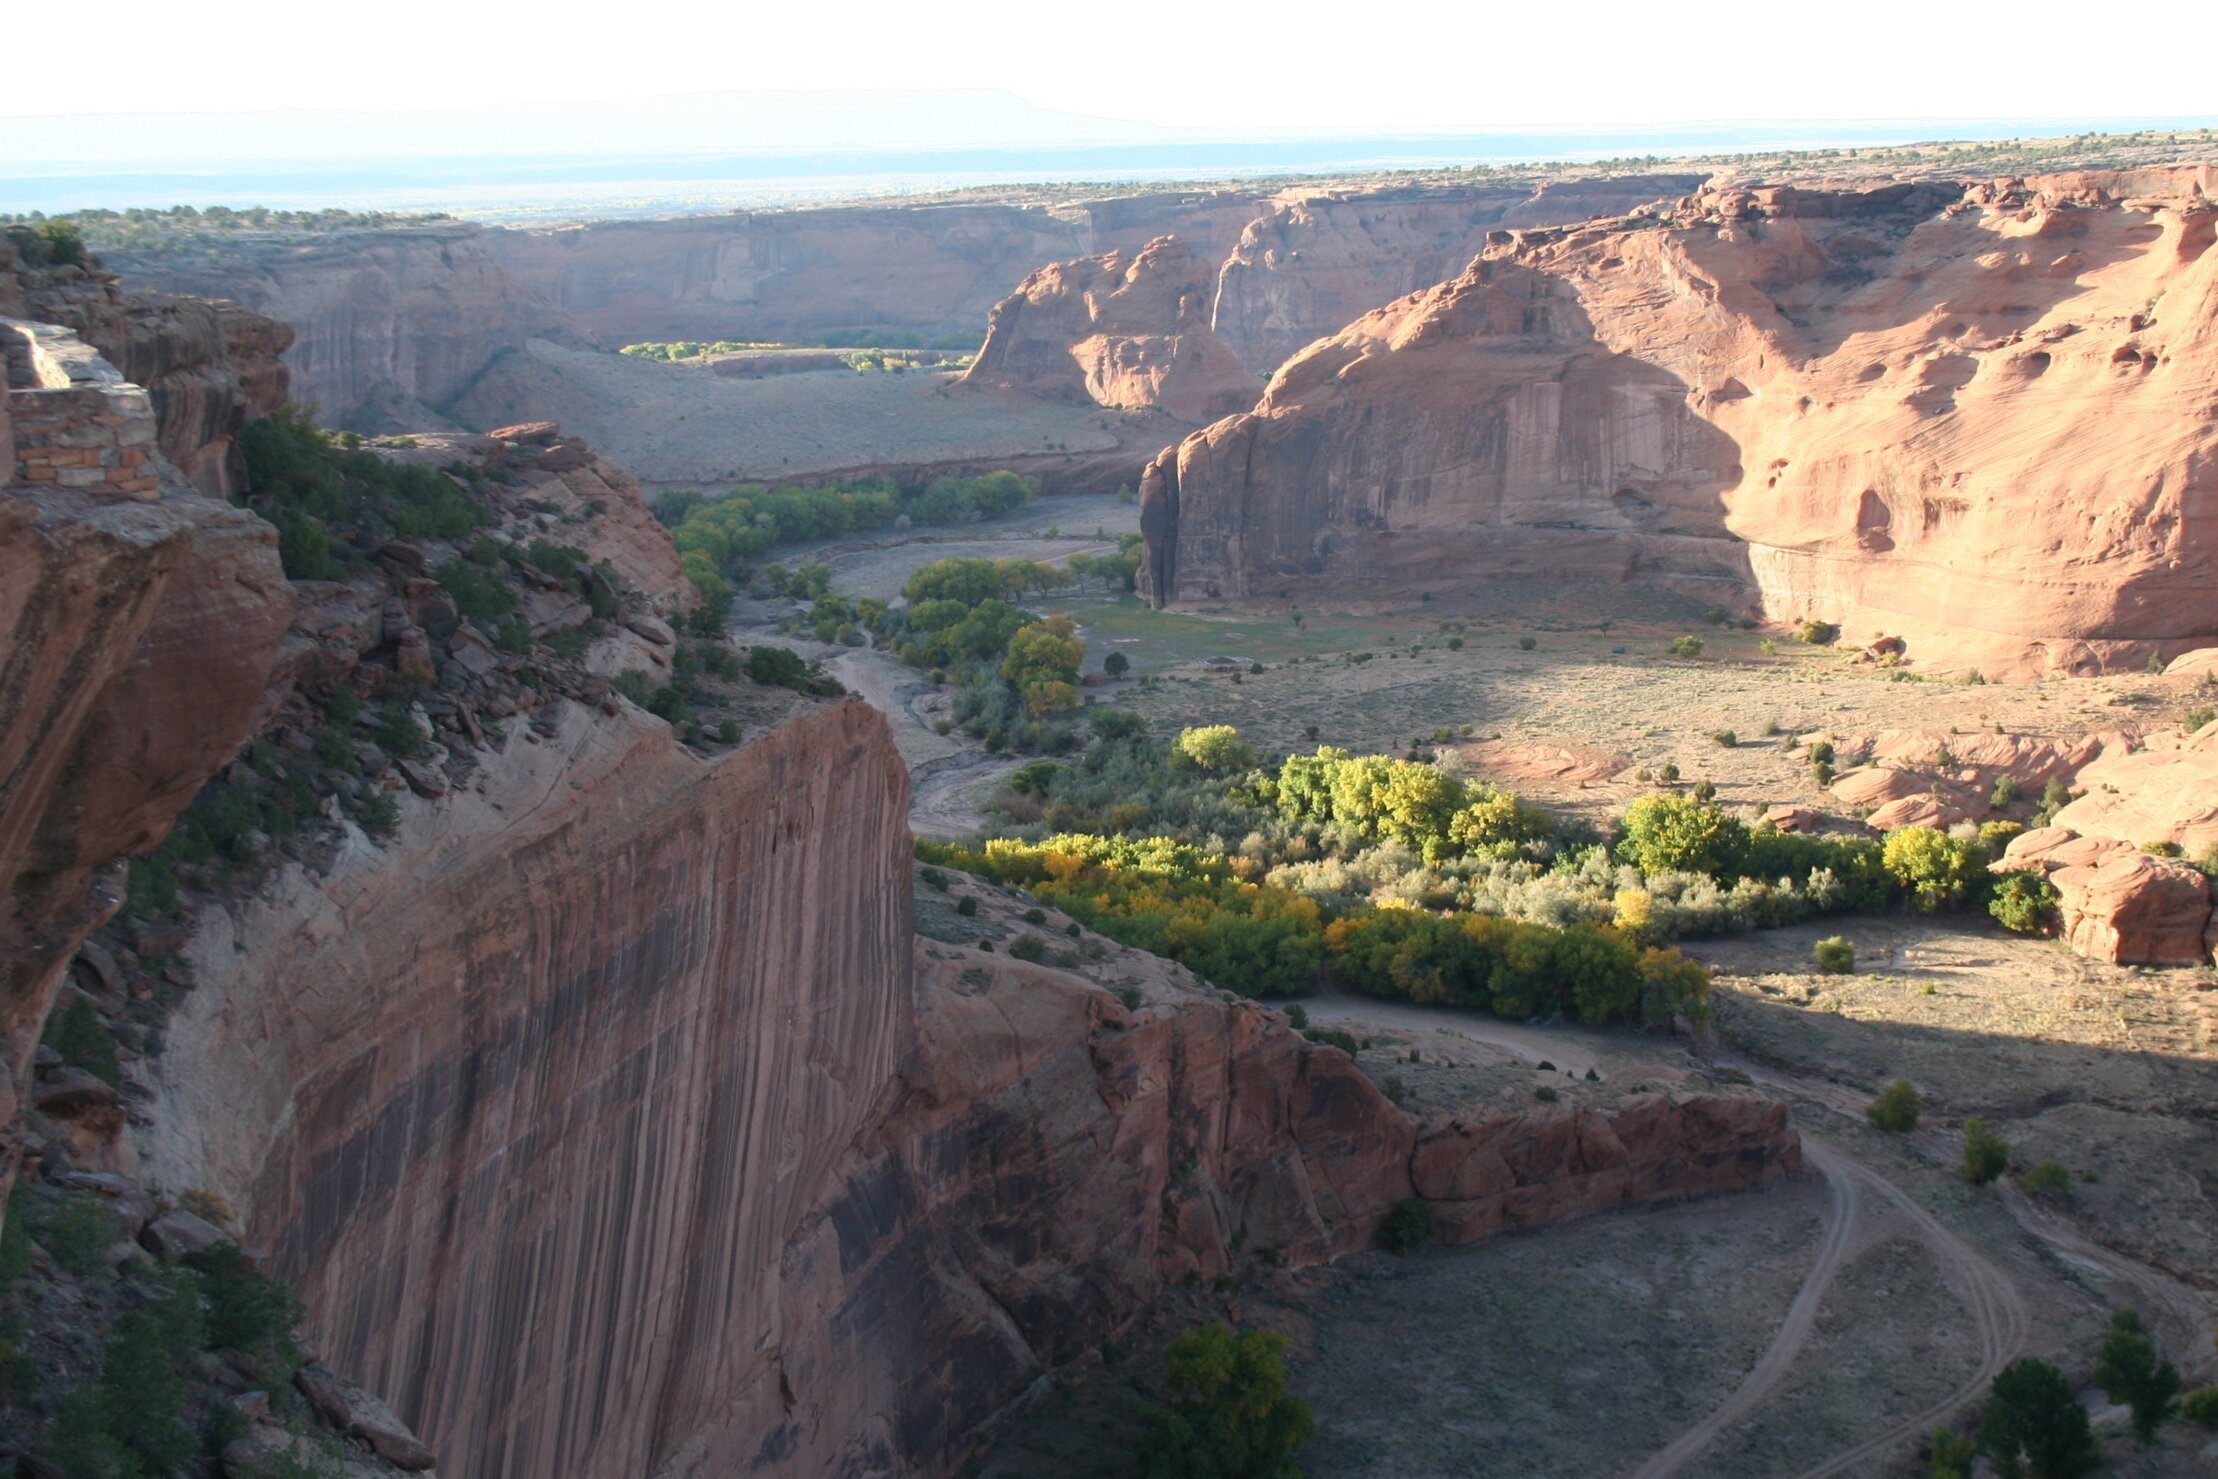   The incredible views don’t seem to end at Canyon de Chelly.  